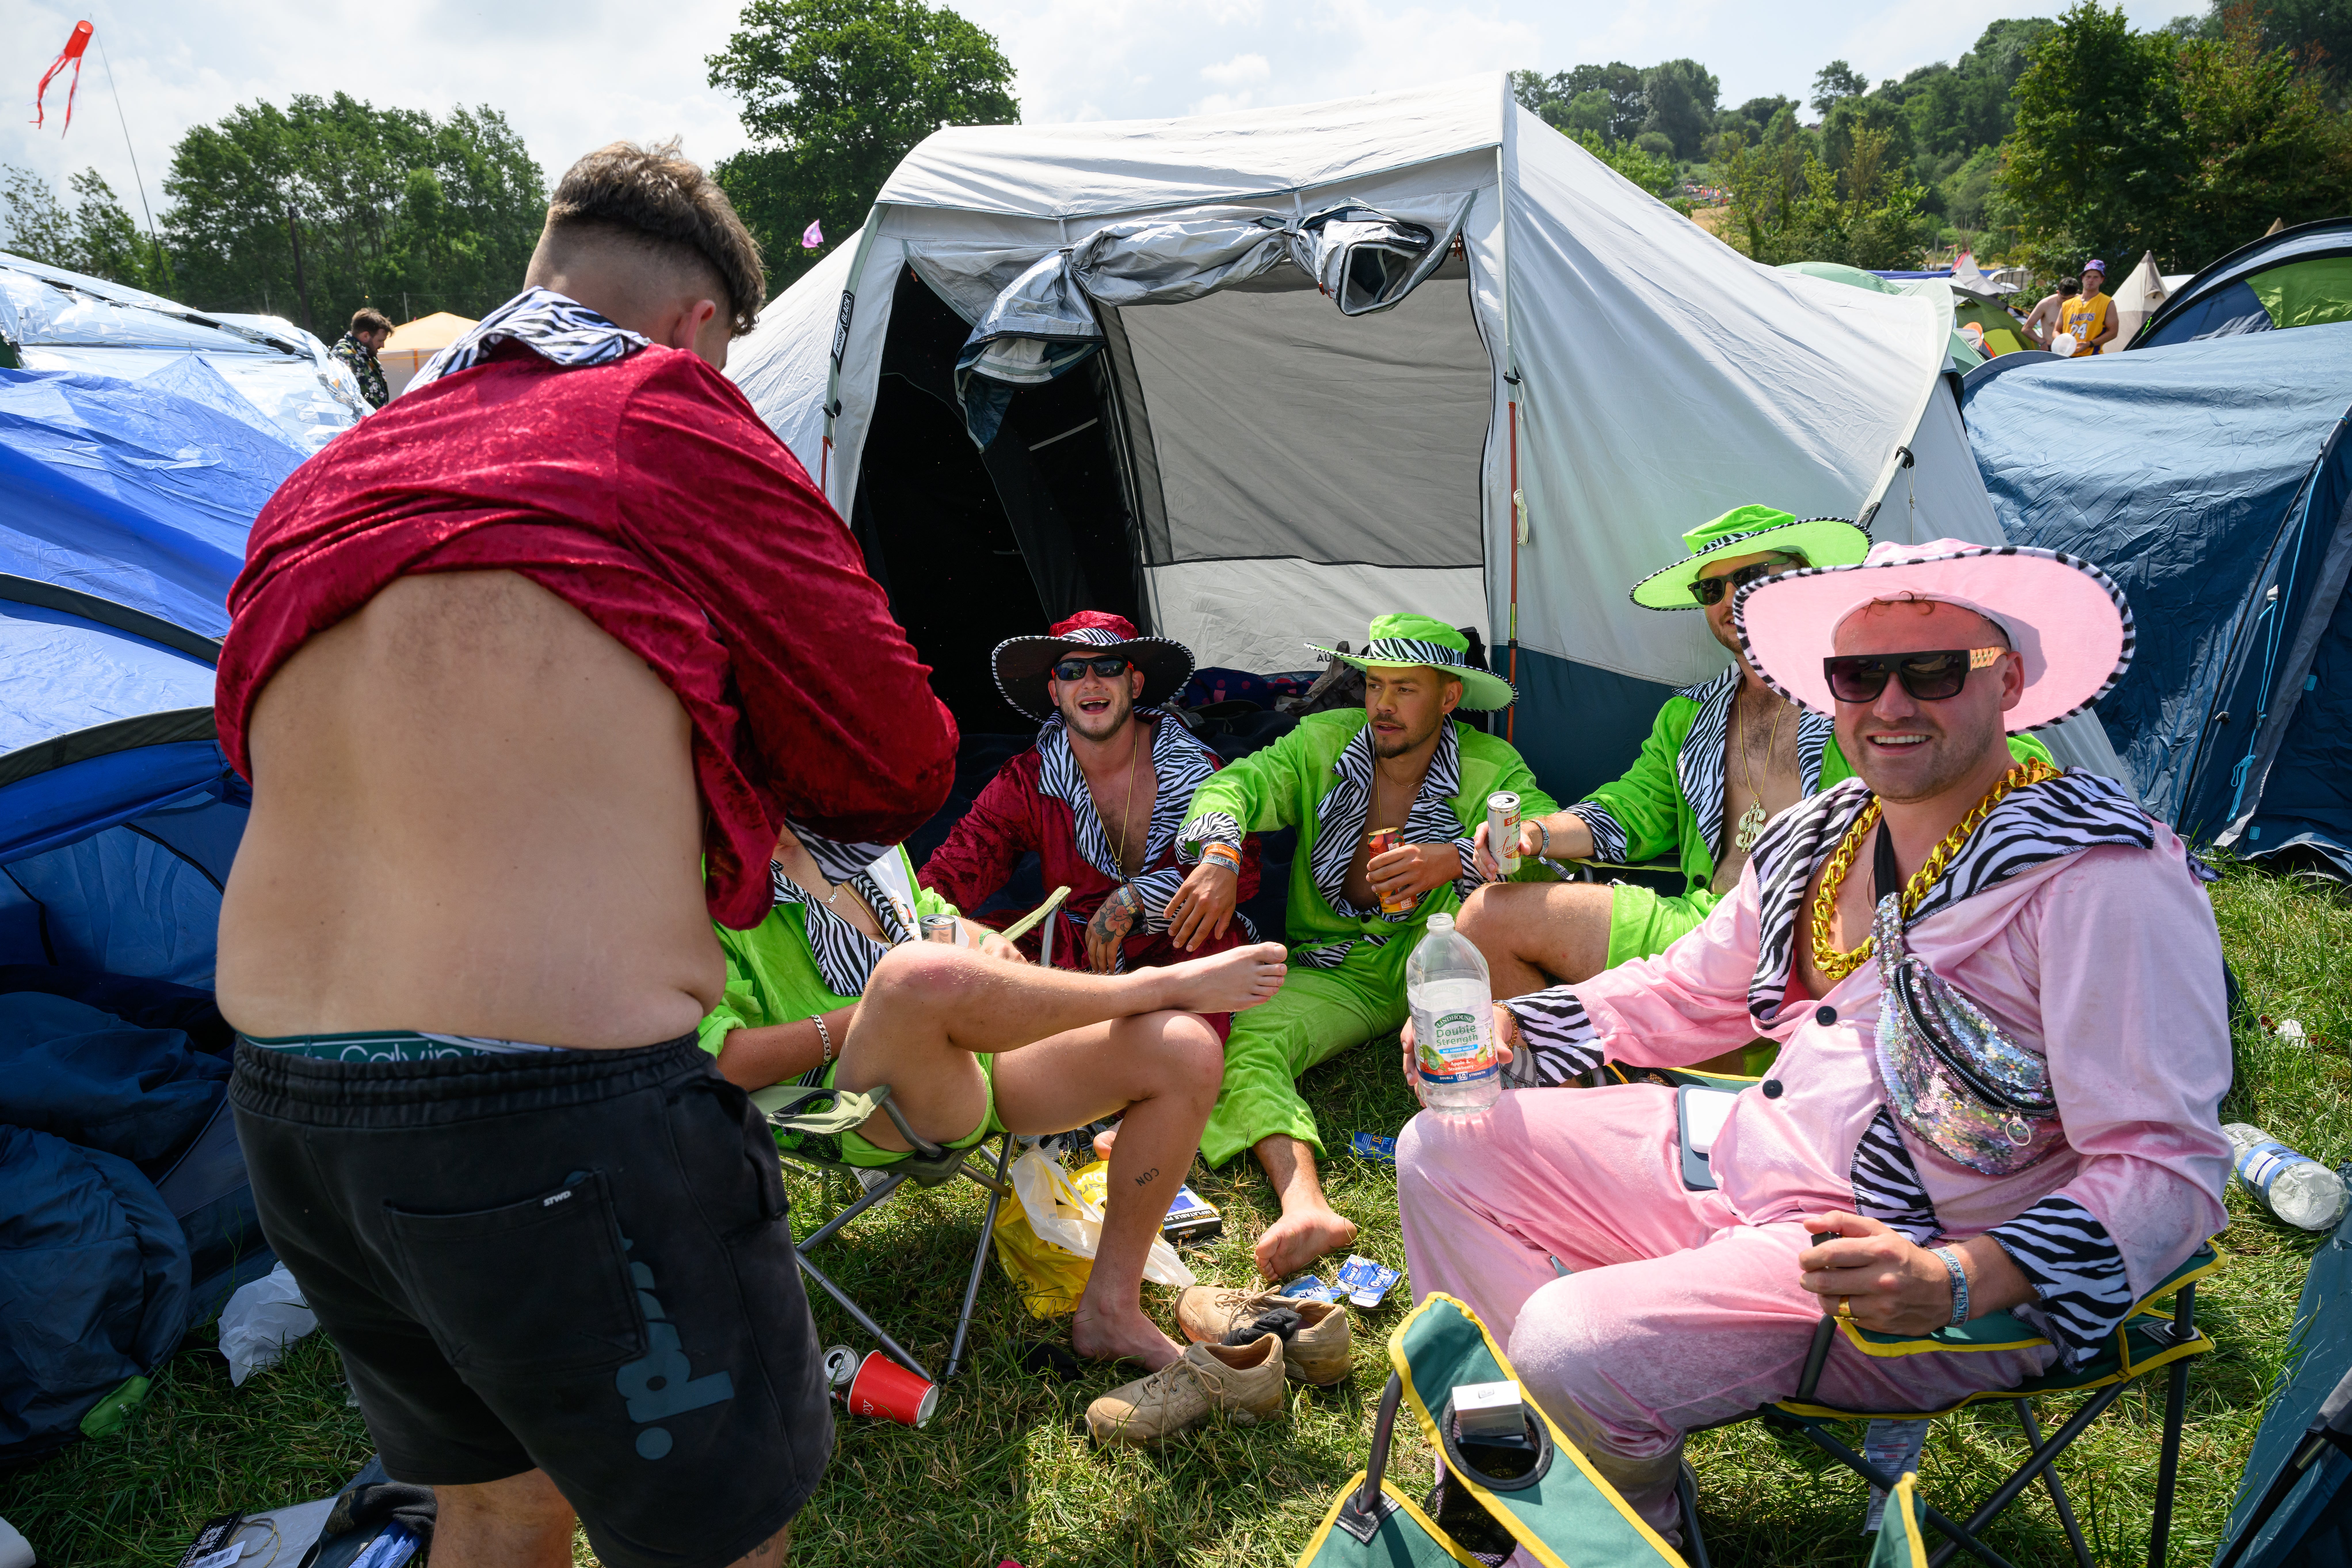 Festival-goers wear matching costumes at the start of day two of Glastonbury Festival 2023 on June 22, 2023